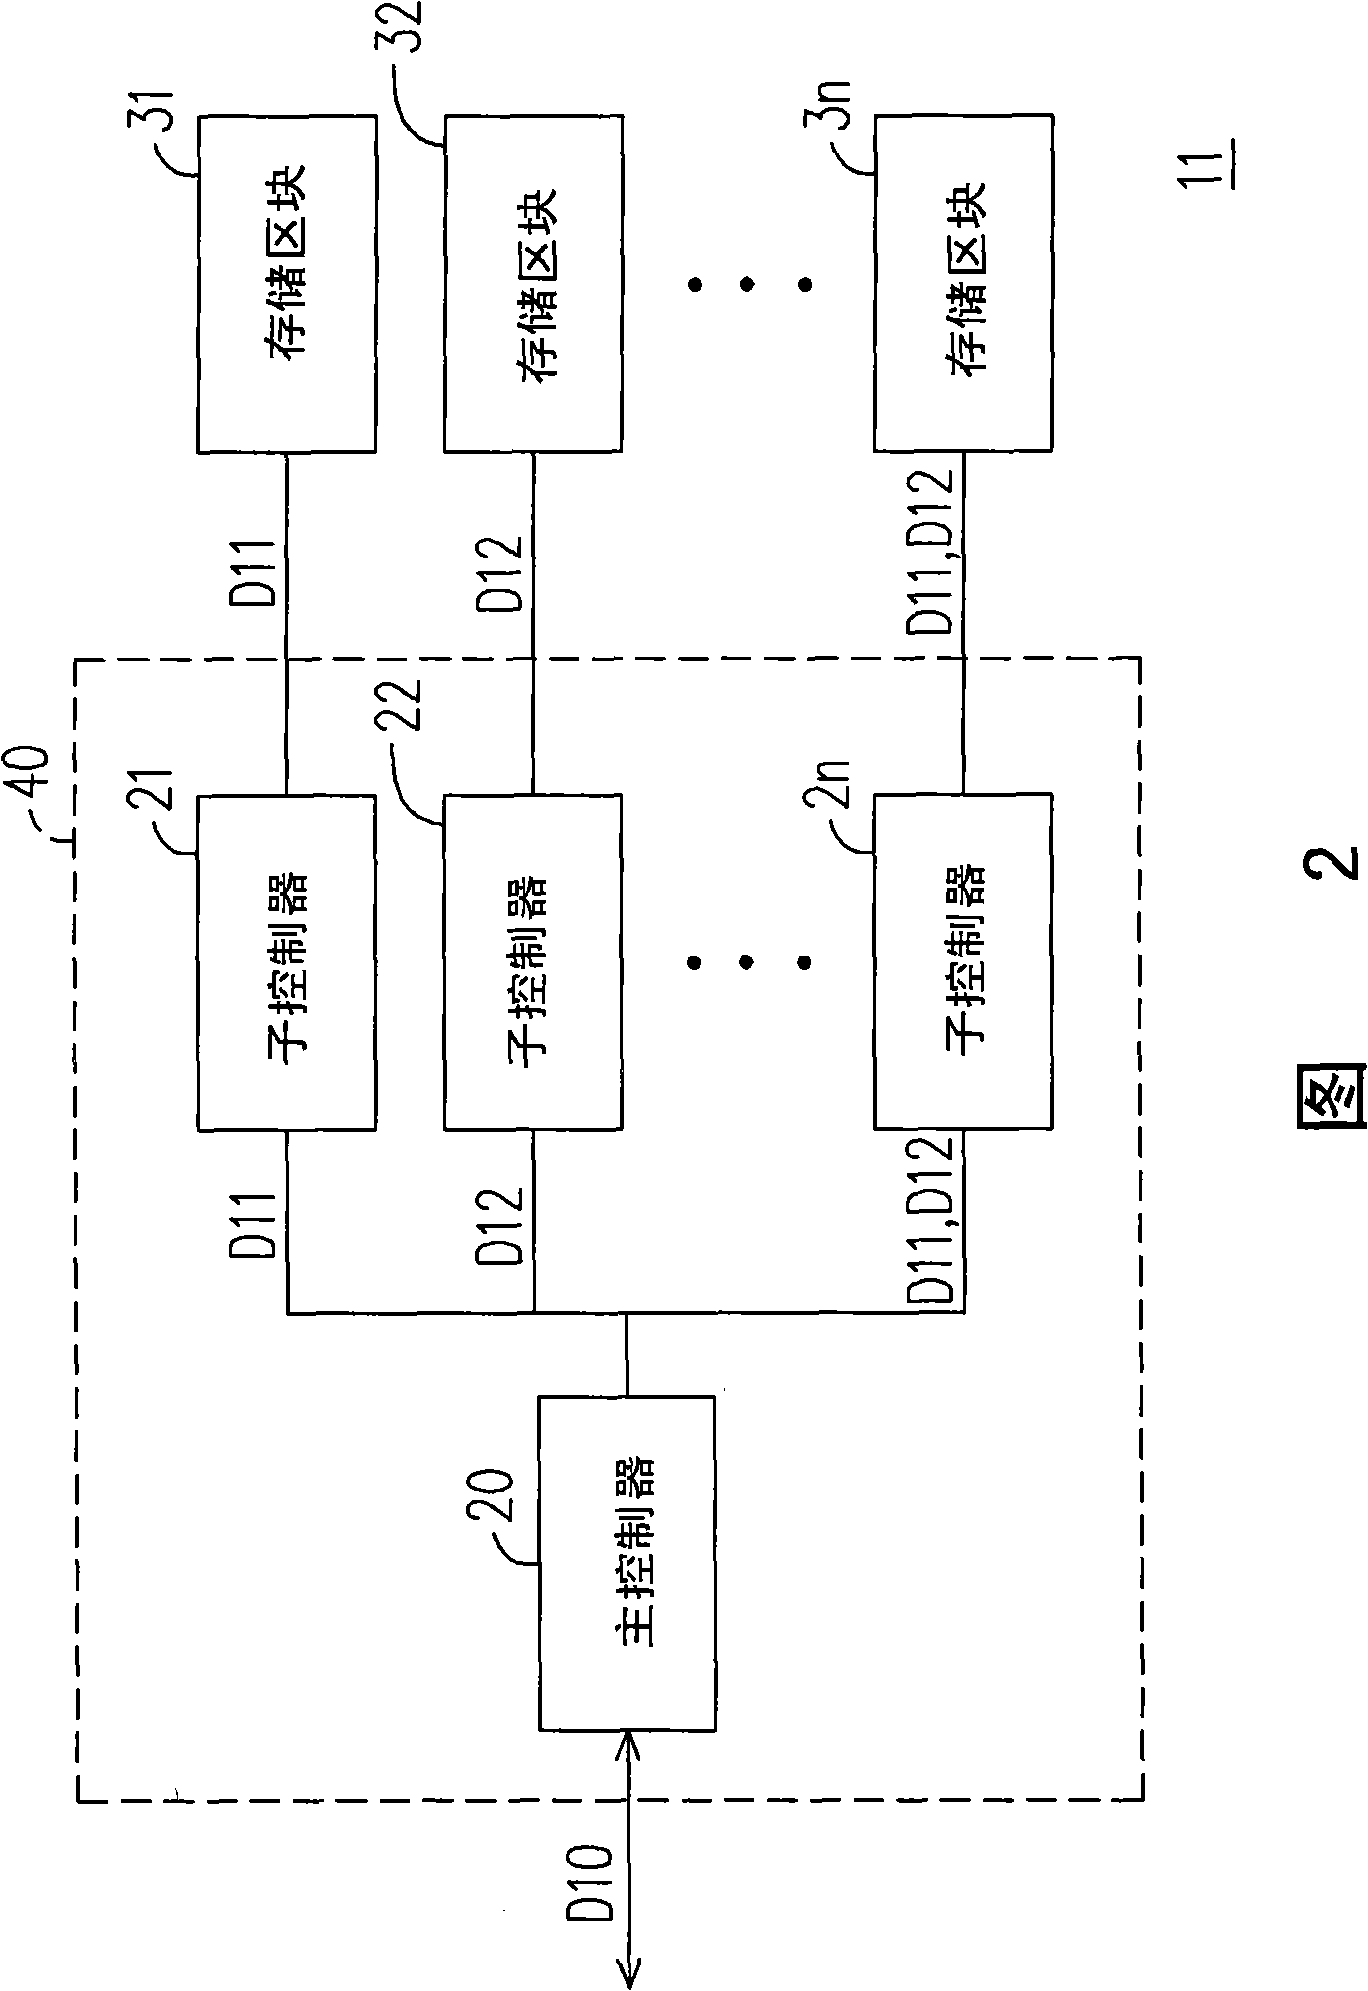 Non-volatile memory device and data access circuit and method thereof